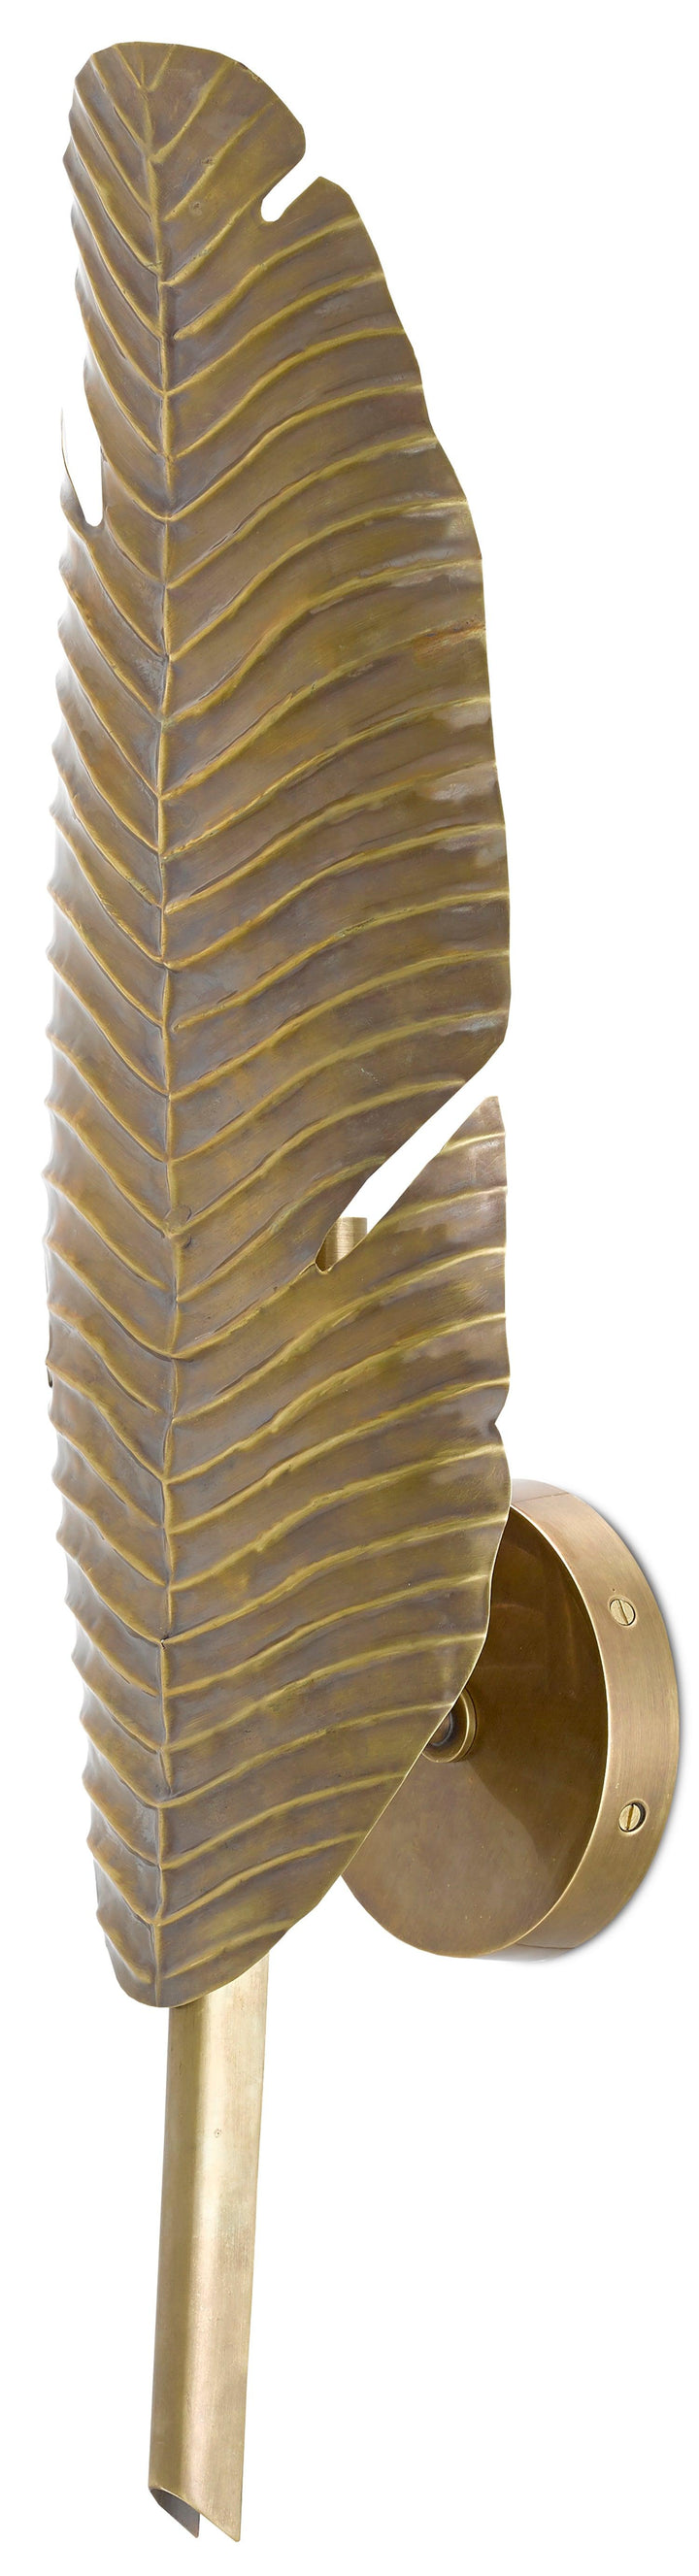 Tropical Leaf Wall Sconce - Casey & Company